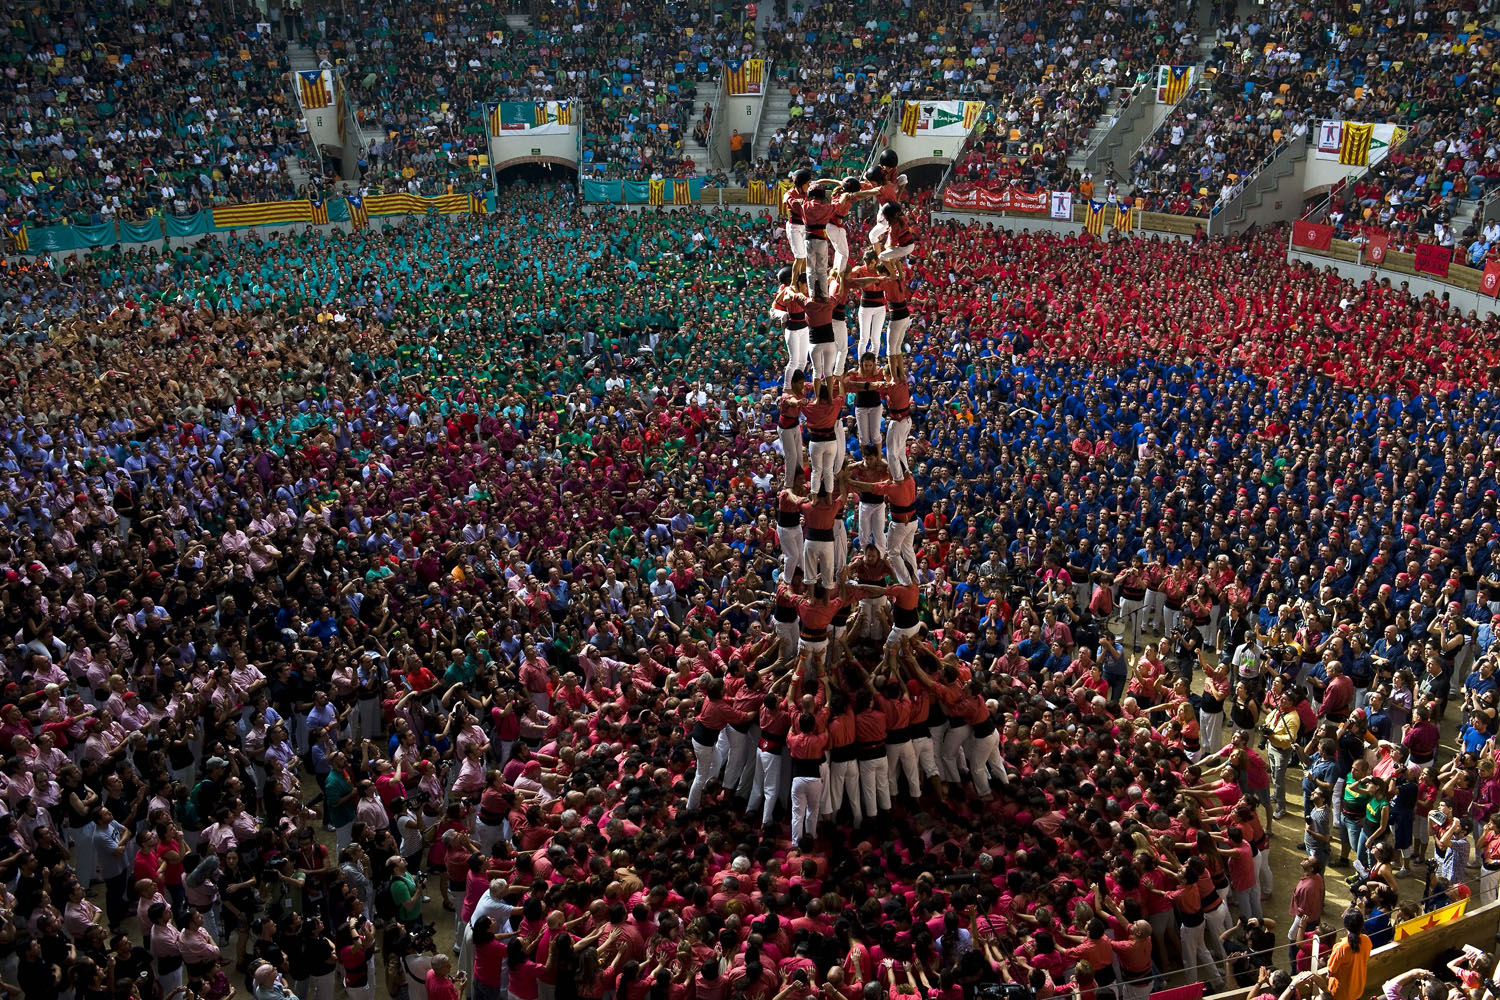 Oct. 7, 2012. Members of the Colla 'Vella de Valls' climb as they construct a human tower during the 24th Tarragona Castells Comptetion in Tarragona, Spain. The 'Castellers' who build the human towers with precise techniques compete in groups, known as 'colles', at local festivals with aim to build the highest and most complex human tower.